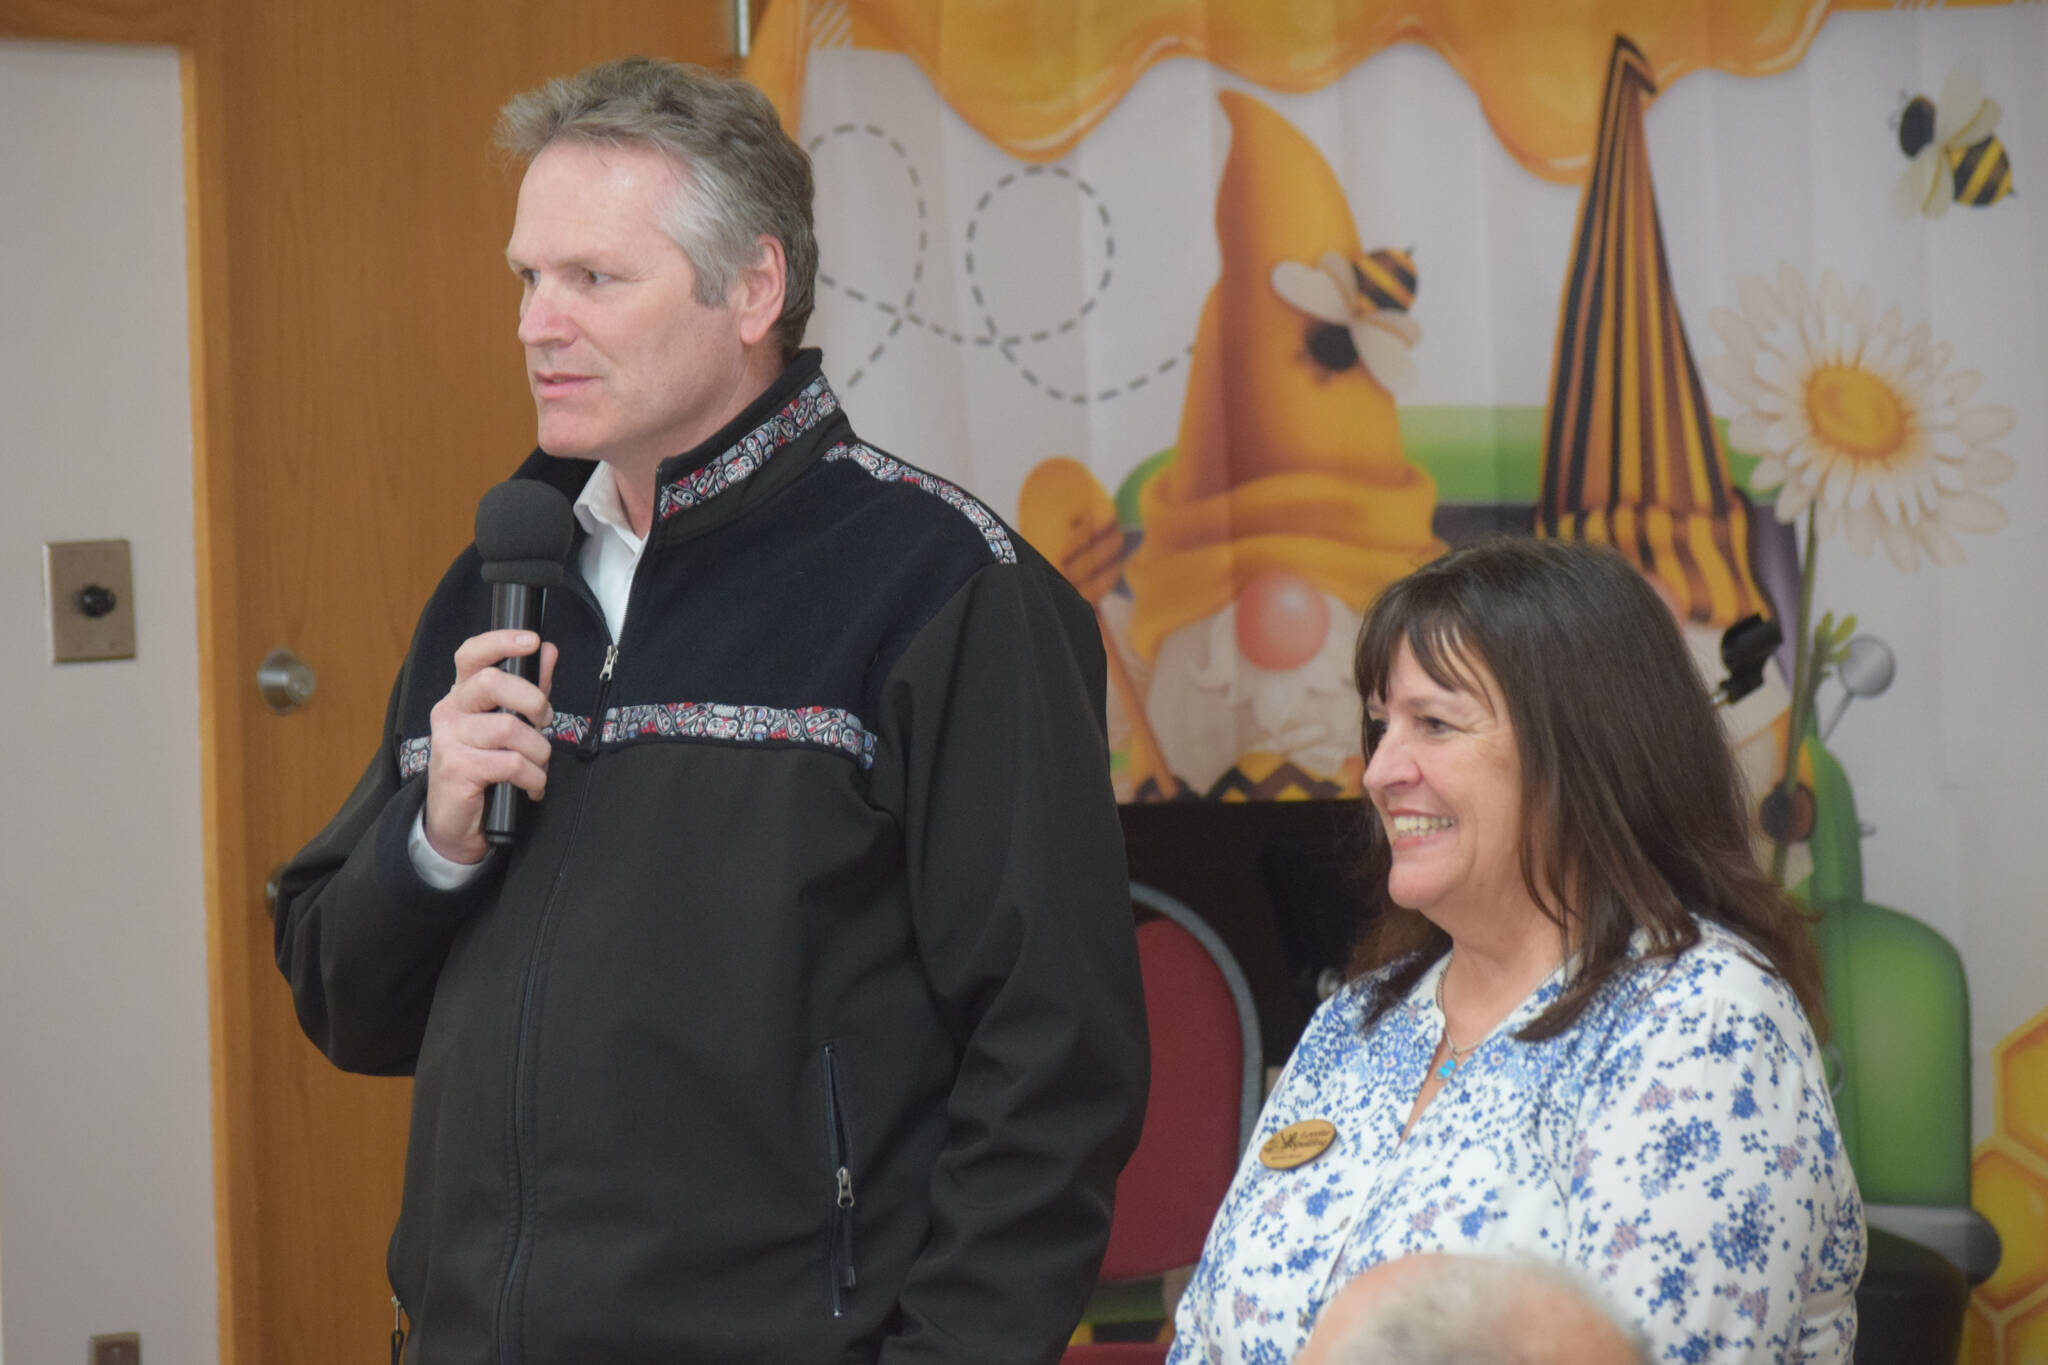 Alaska Gov. Mike Dunleavy speaks at the Soldotna Senior Center with Executive Director Loretta Knudson-Spalding on Friday, May 6, 2022. (Camille Botello/Peninsula Clarion)